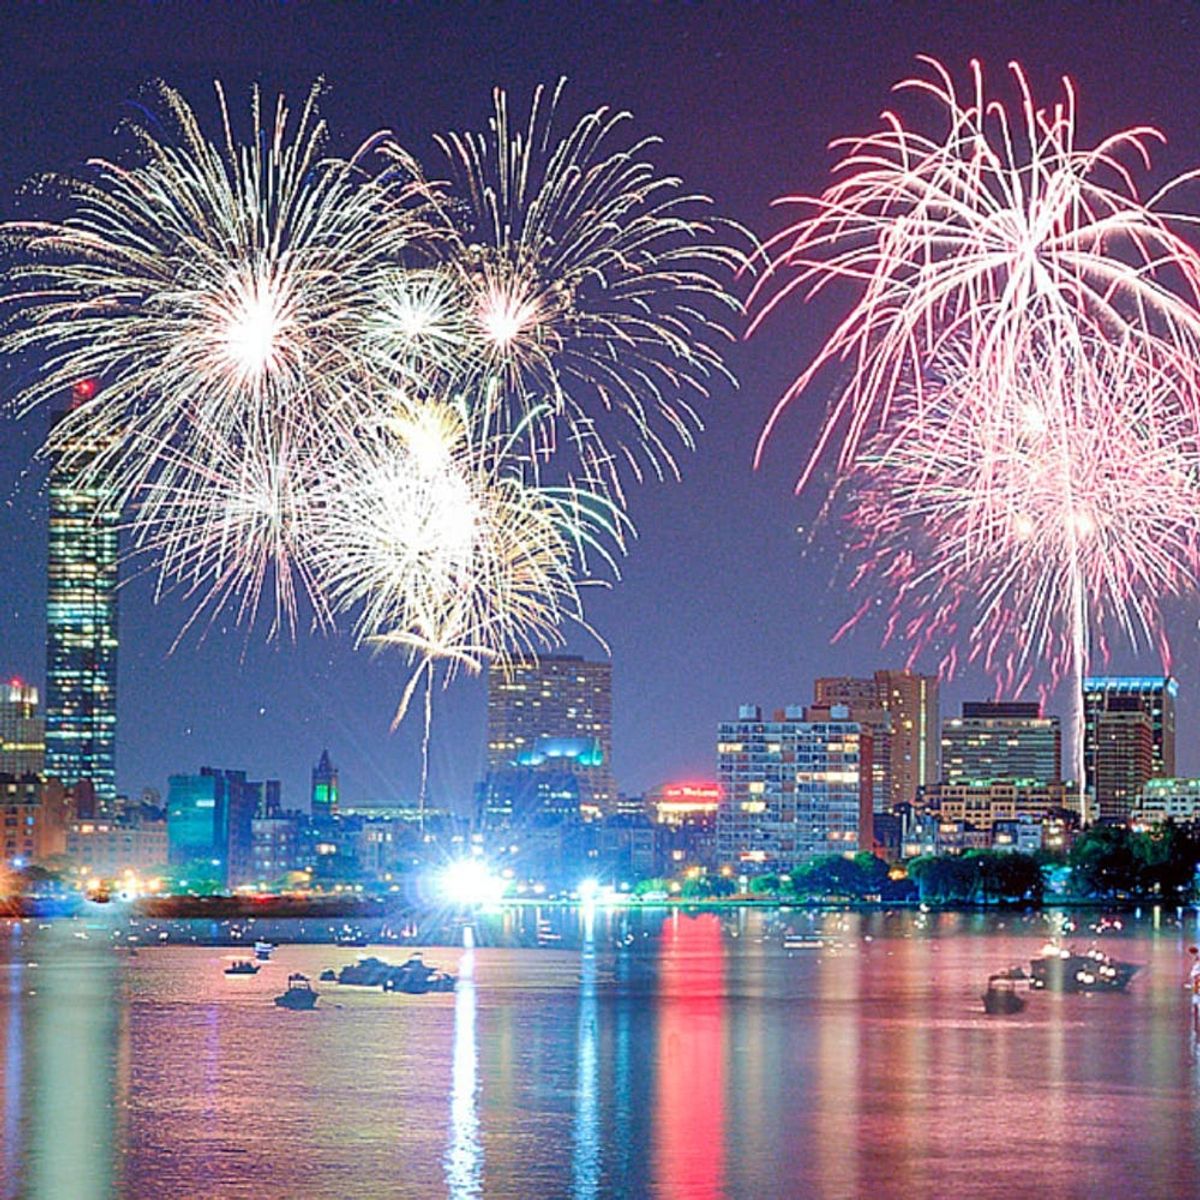 10 Amazing Fireworks Shows You’ll Wish You Were at on July 4th